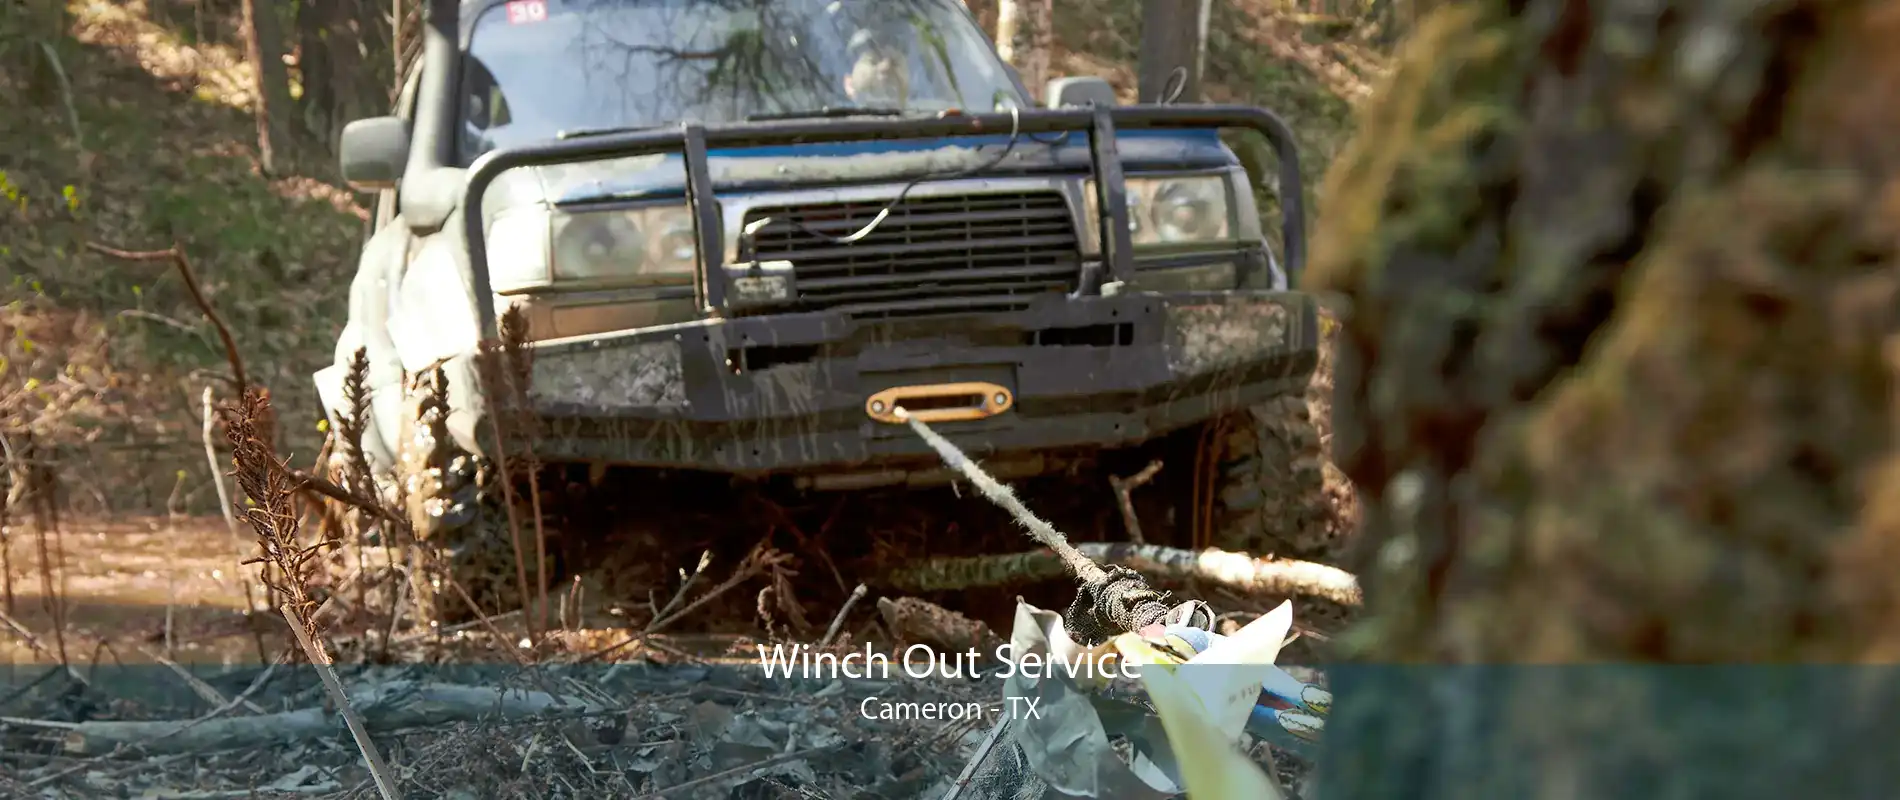 Winch Out Service Cameron - TX